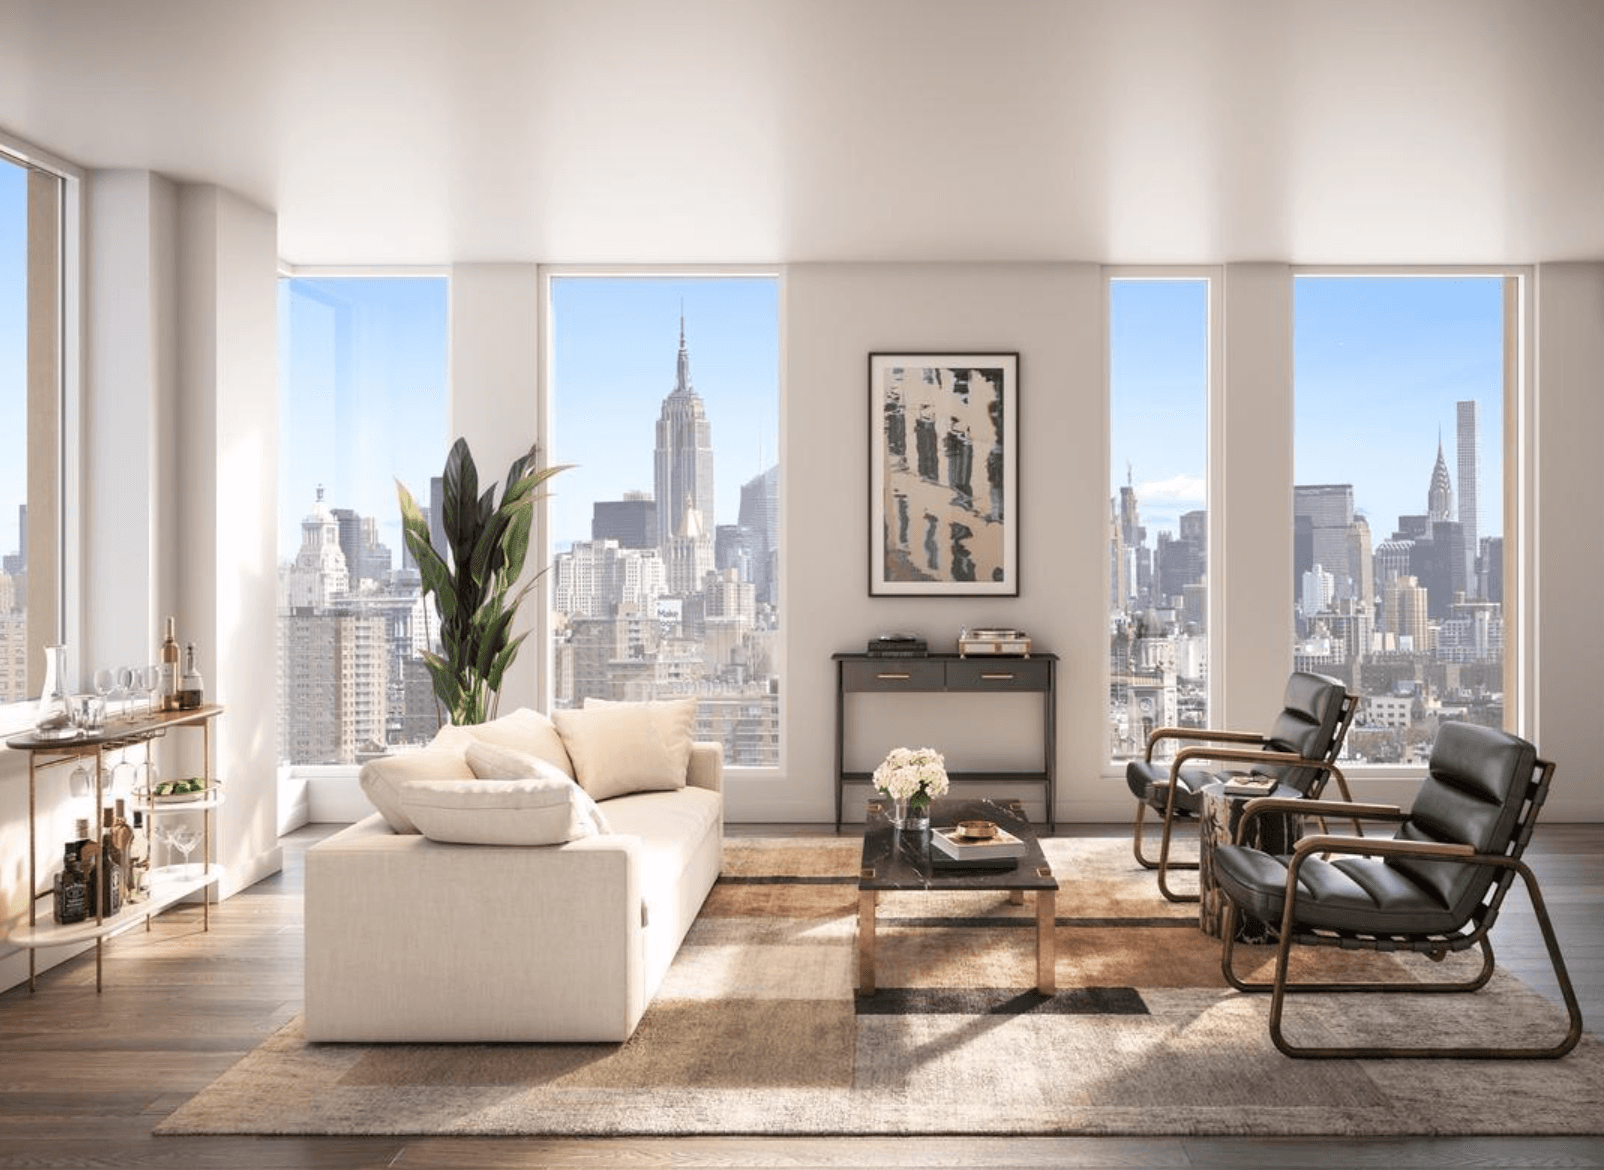 Now being offered with ONE MONTH FREE and NO BROKER FEE BRAND NEW LUXURY 1BR WITH HUGE PRIVATE TERRACE in one of the most desirable buildings on the Lower East ...